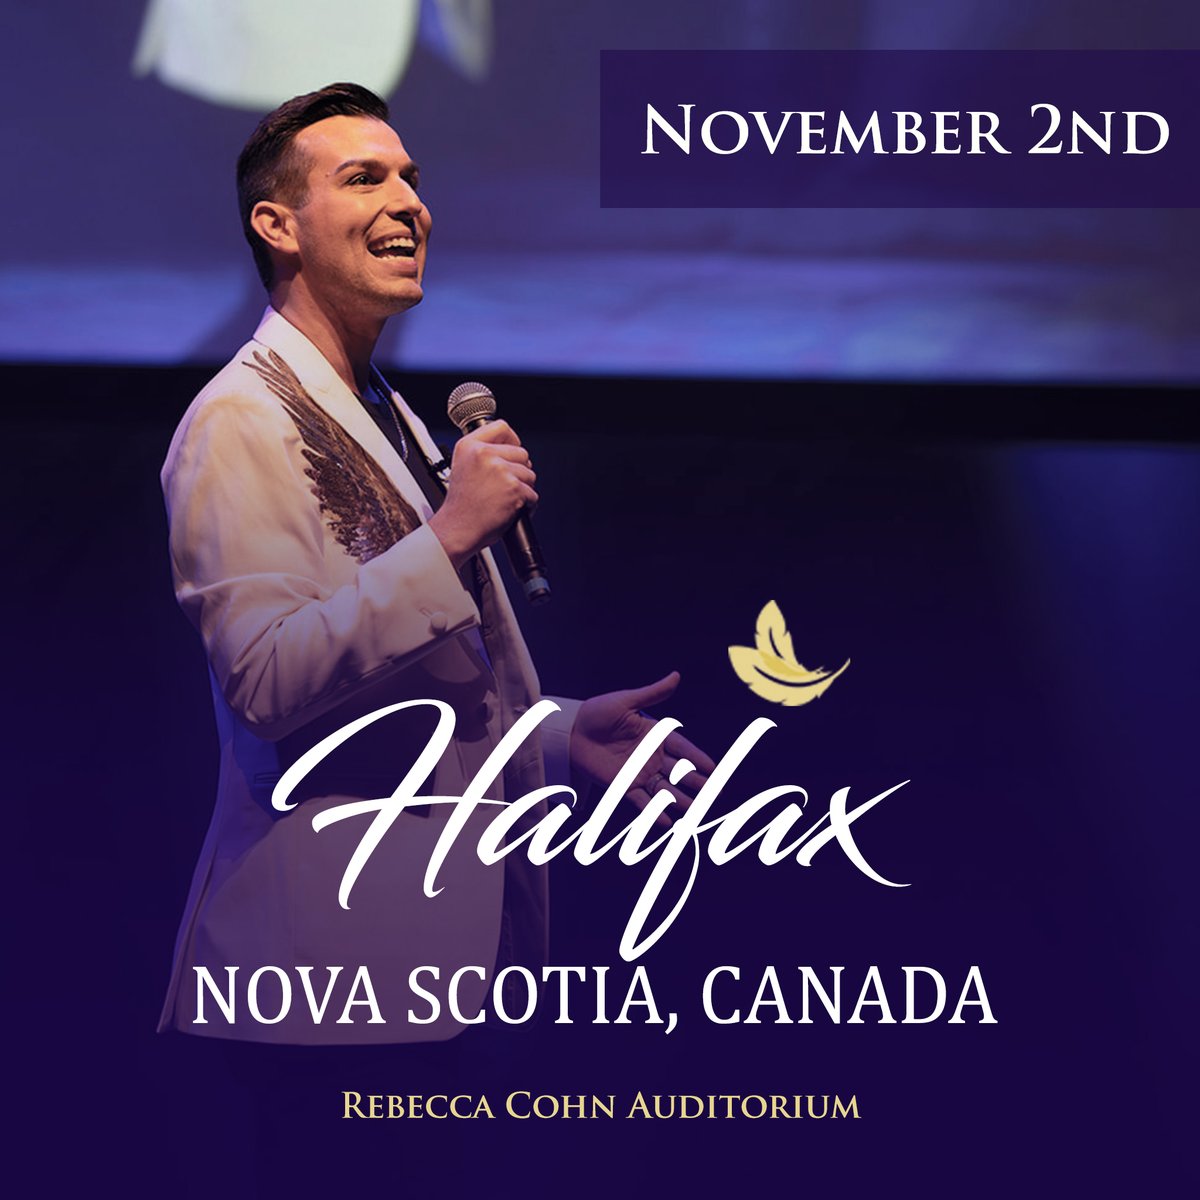 🇨🇦 Attention Nova Scotia! Join Matt Fraser, America's Top Psychic Medium, at the Rebecca Cohn Auditorium in Halifax on November 2nd. Book your tickets today at MeetMattFraser.com